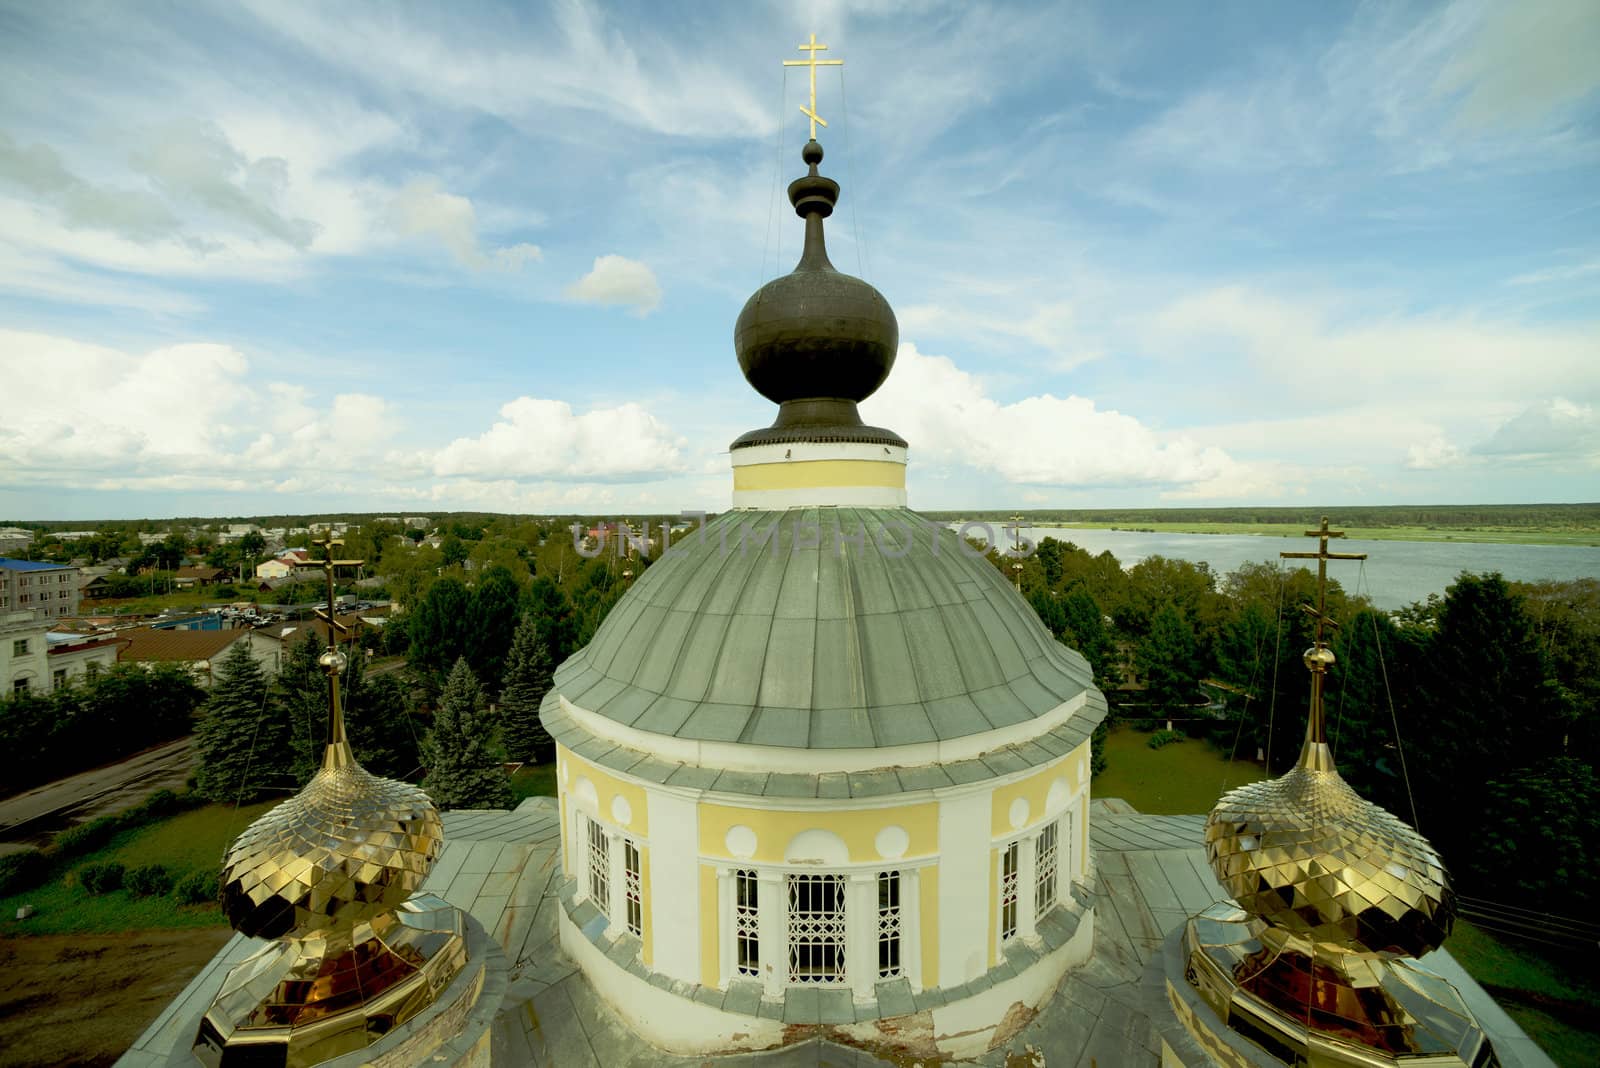 Gilded domes of old church in the settlement Myshkin in Russia.Taken on July 2012.